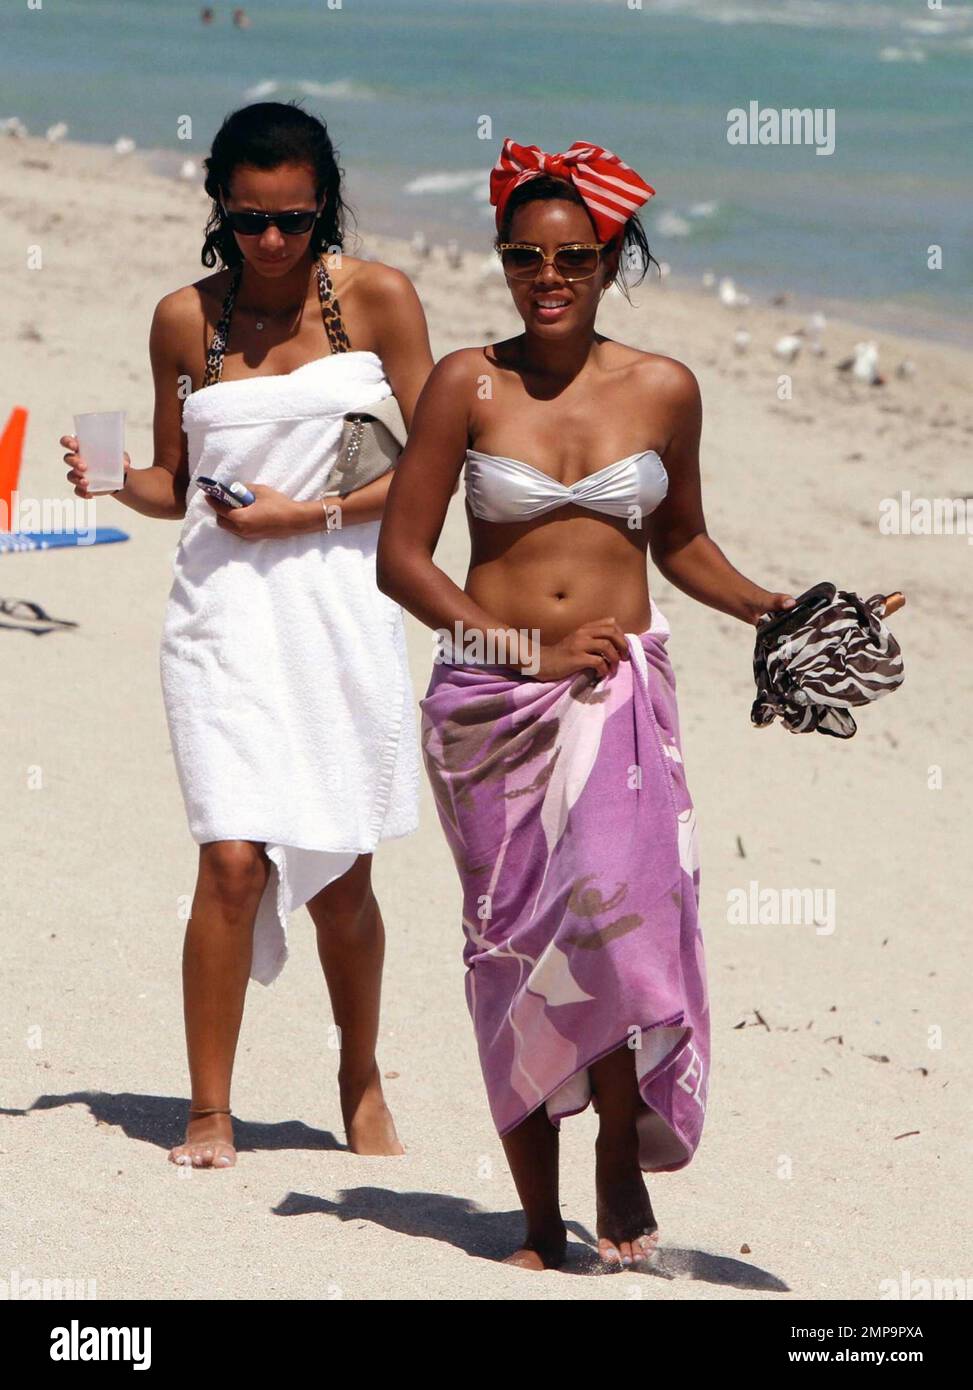 American socialite and entrepreneur, Angela Simmons, best known as the daughter of Run-D.M.C.'s Rev Run and neice of hip-hop legend Russell Simmons, wears a silver bikini paired with a floppy red scarf on her head as she spends an afternoon with a friend soaking up the sun on trendy South Beach. Angela looked like she had a blast while jet skiing and donned a zebra-print cover-up as she strolled with her friend on the sand. Miami Beach, FL.  3/1/11. Stock Photo